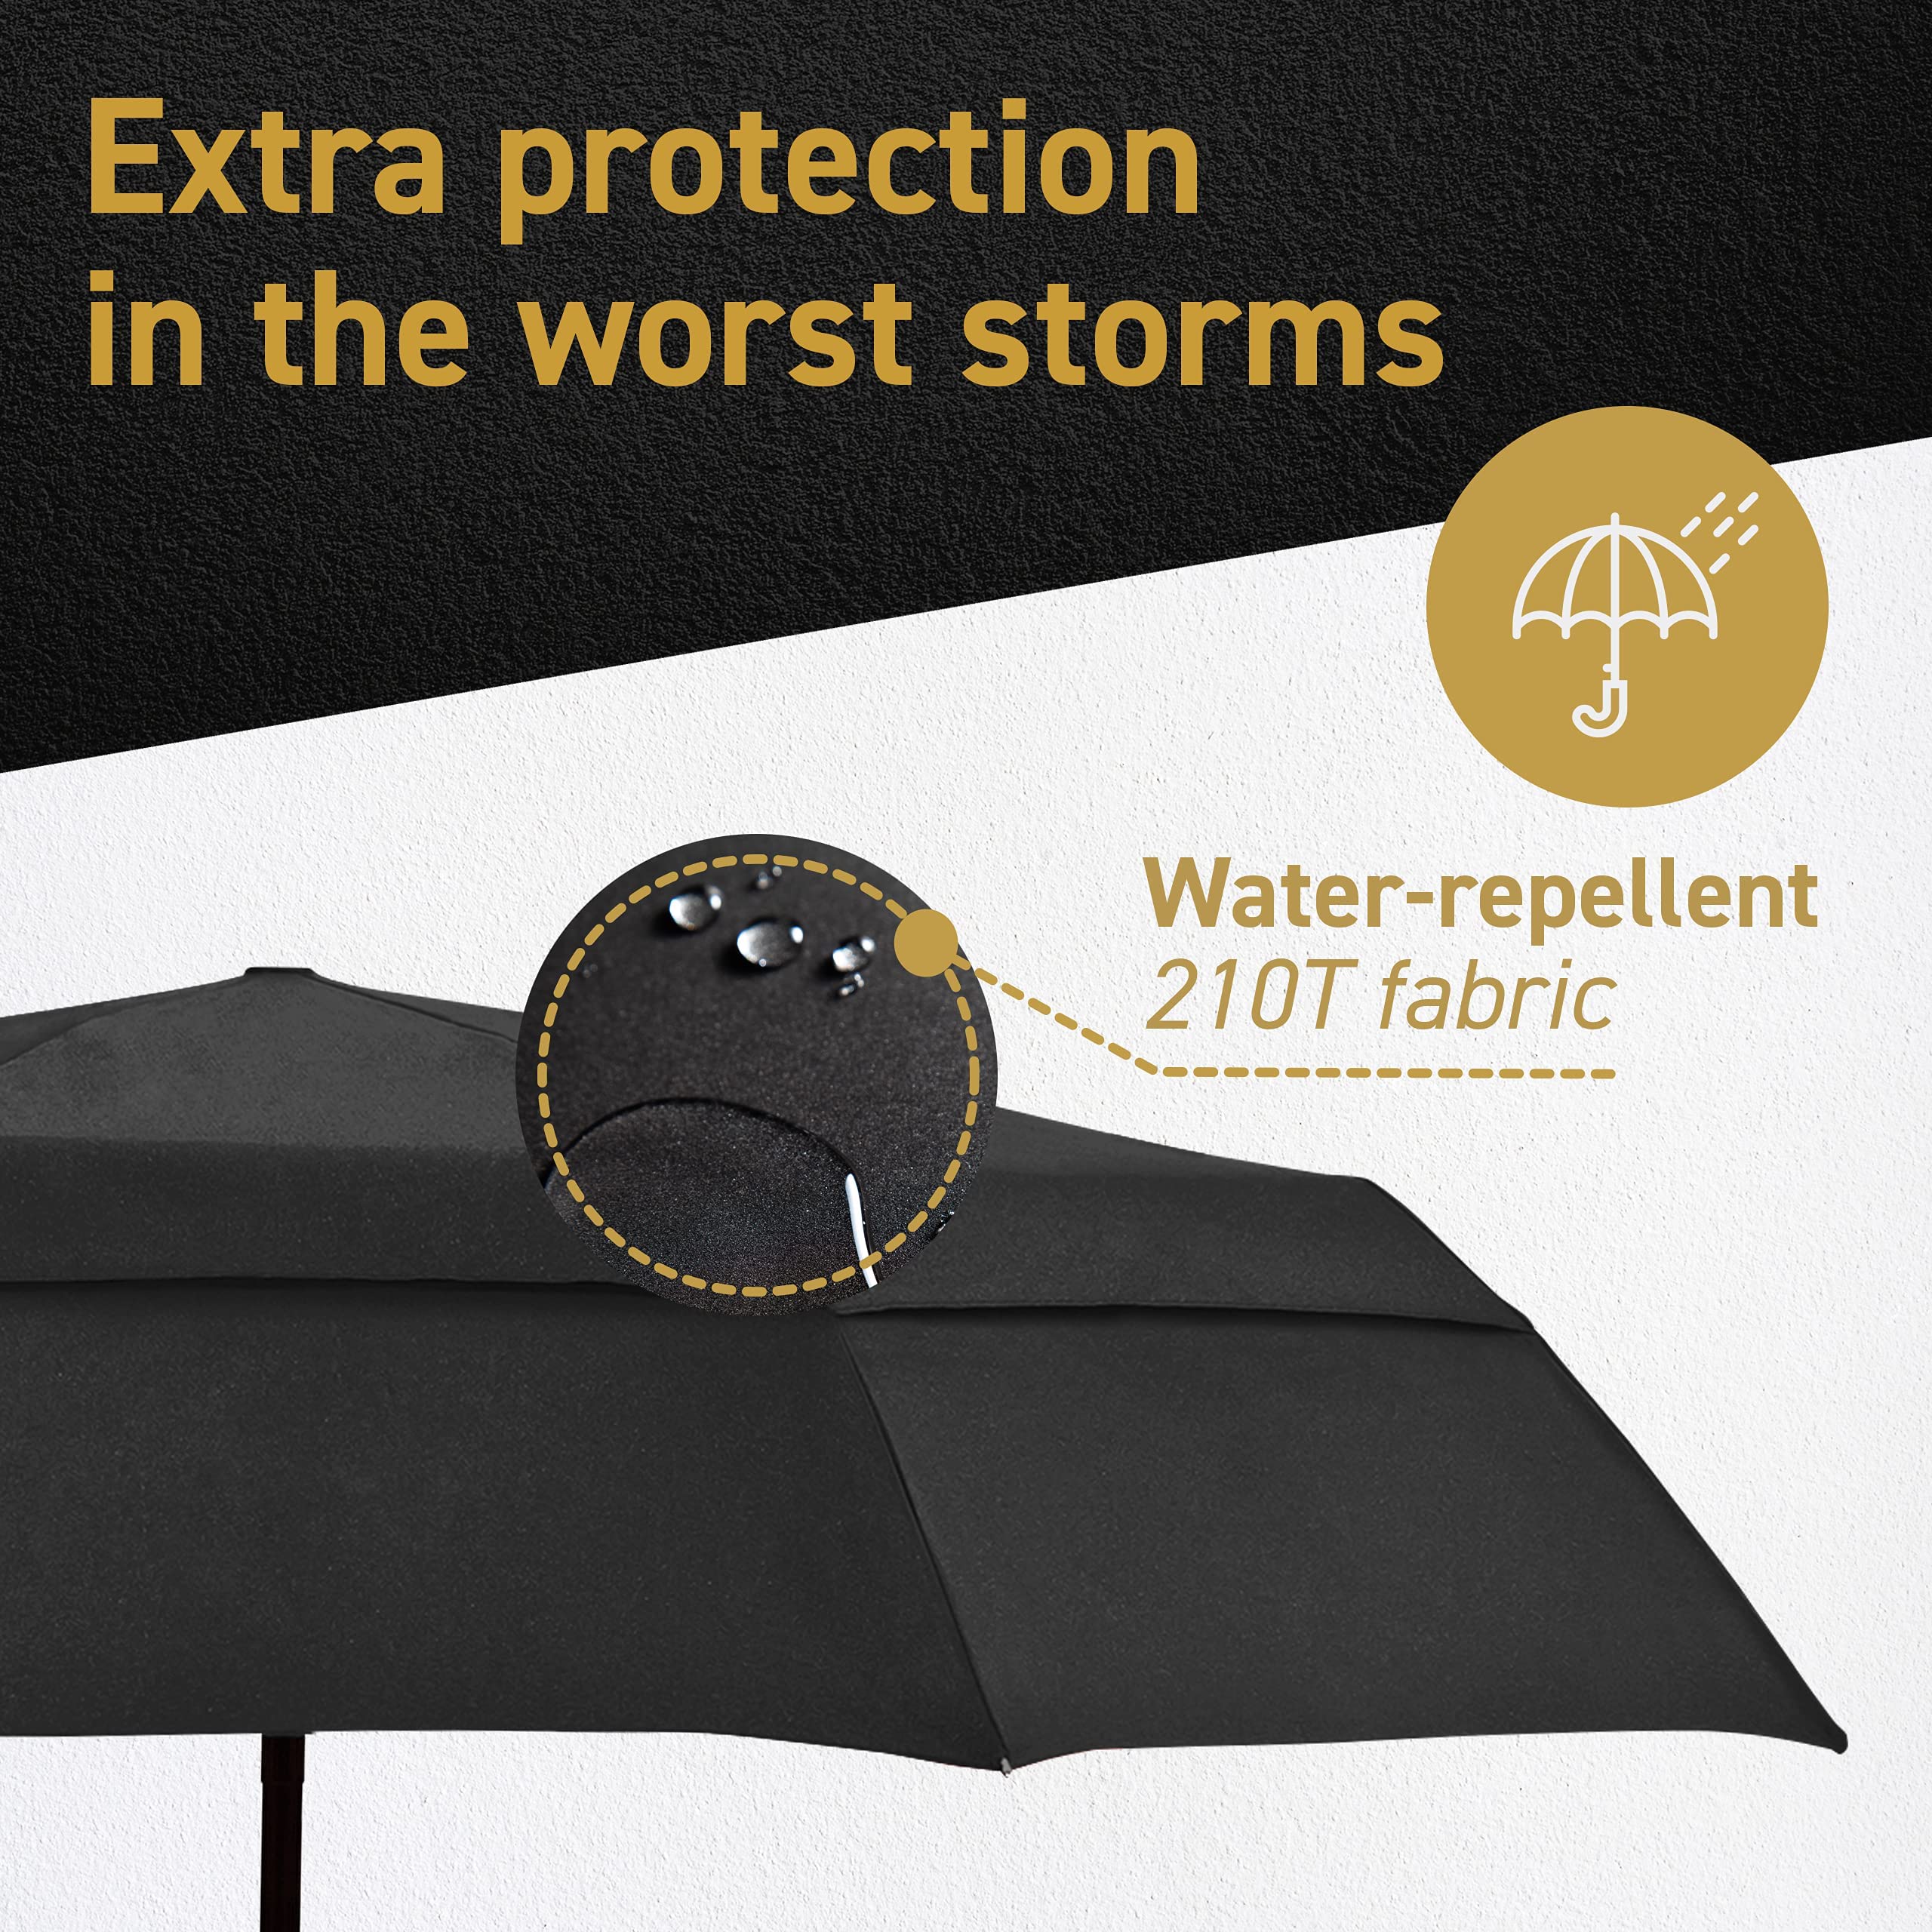 Windproof Travel Umbrellas for Rain - Lightweight, Strong, Compact with & Easy Auto Open/Close Button for Single Hand Use - Double Vented Canopy for Men & Women